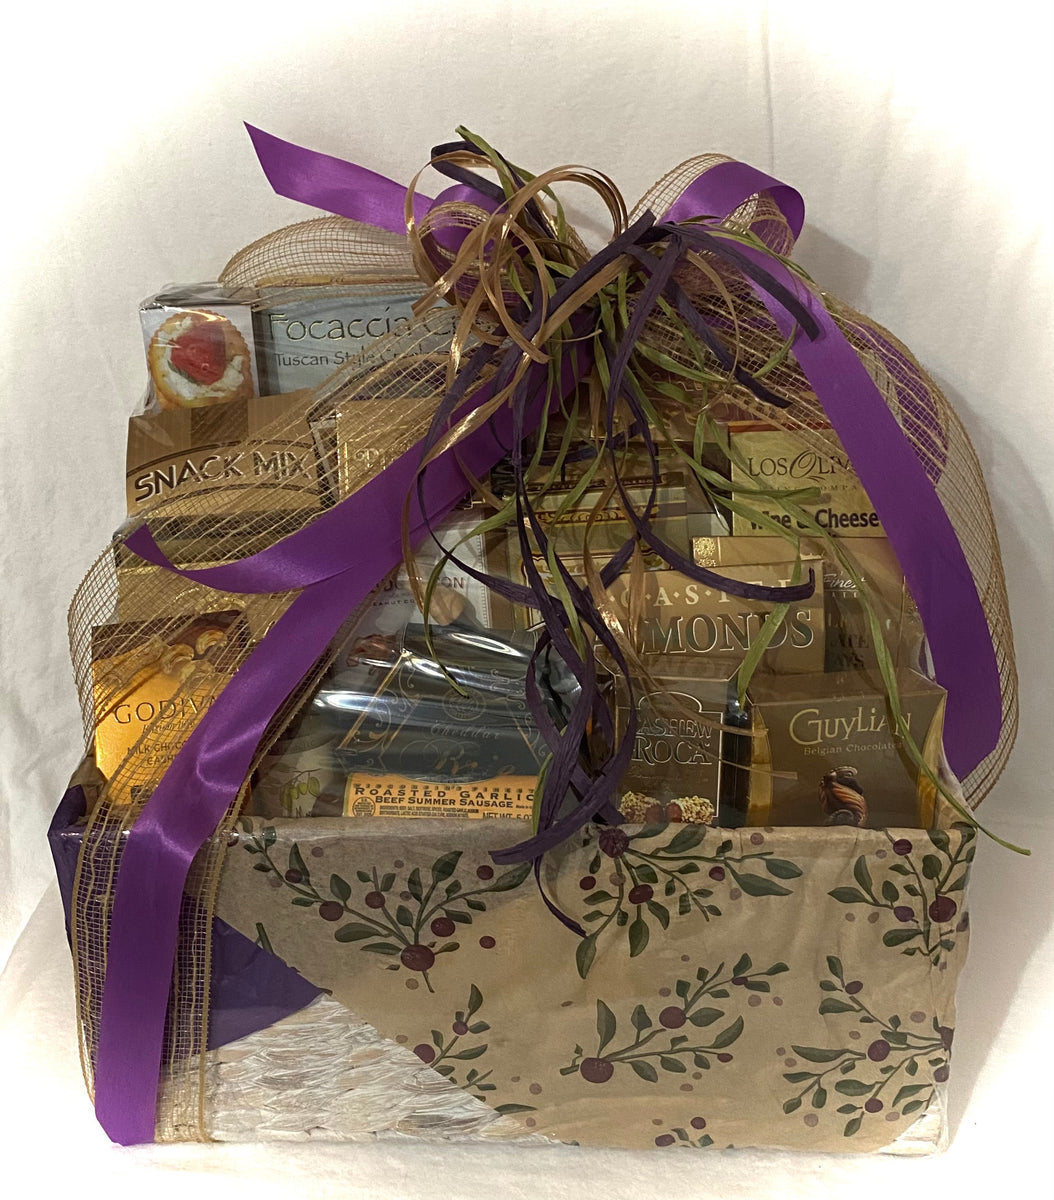 wedding gifts, gift baskets, gifts, lake norman, huntersville, cornelius,  charlotte nc gifts – Perfect Selection Creative Gifts